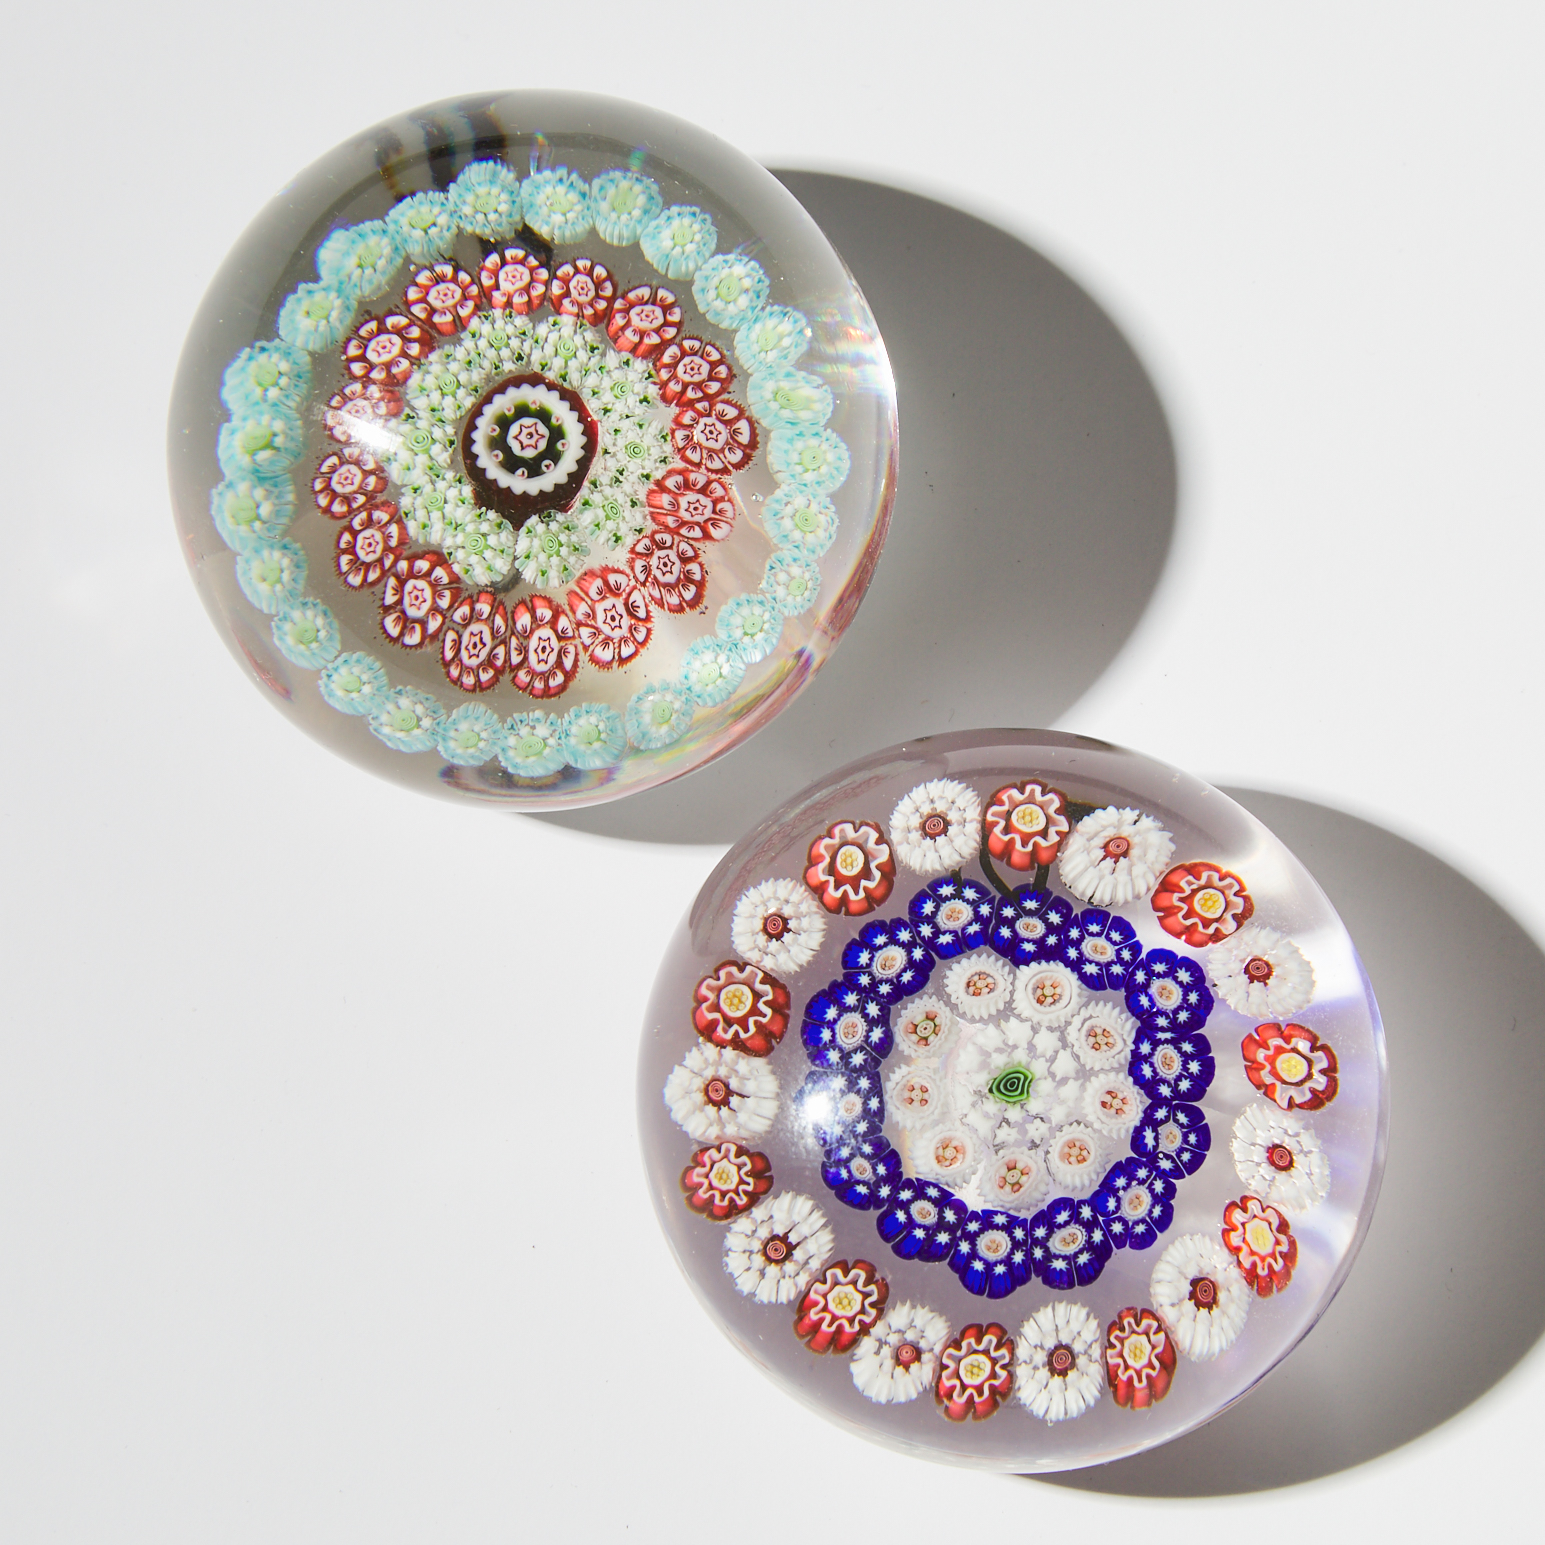 Two Miniature Concentric Millefiori Glass Paperweights, probably Baccarat, 19th century